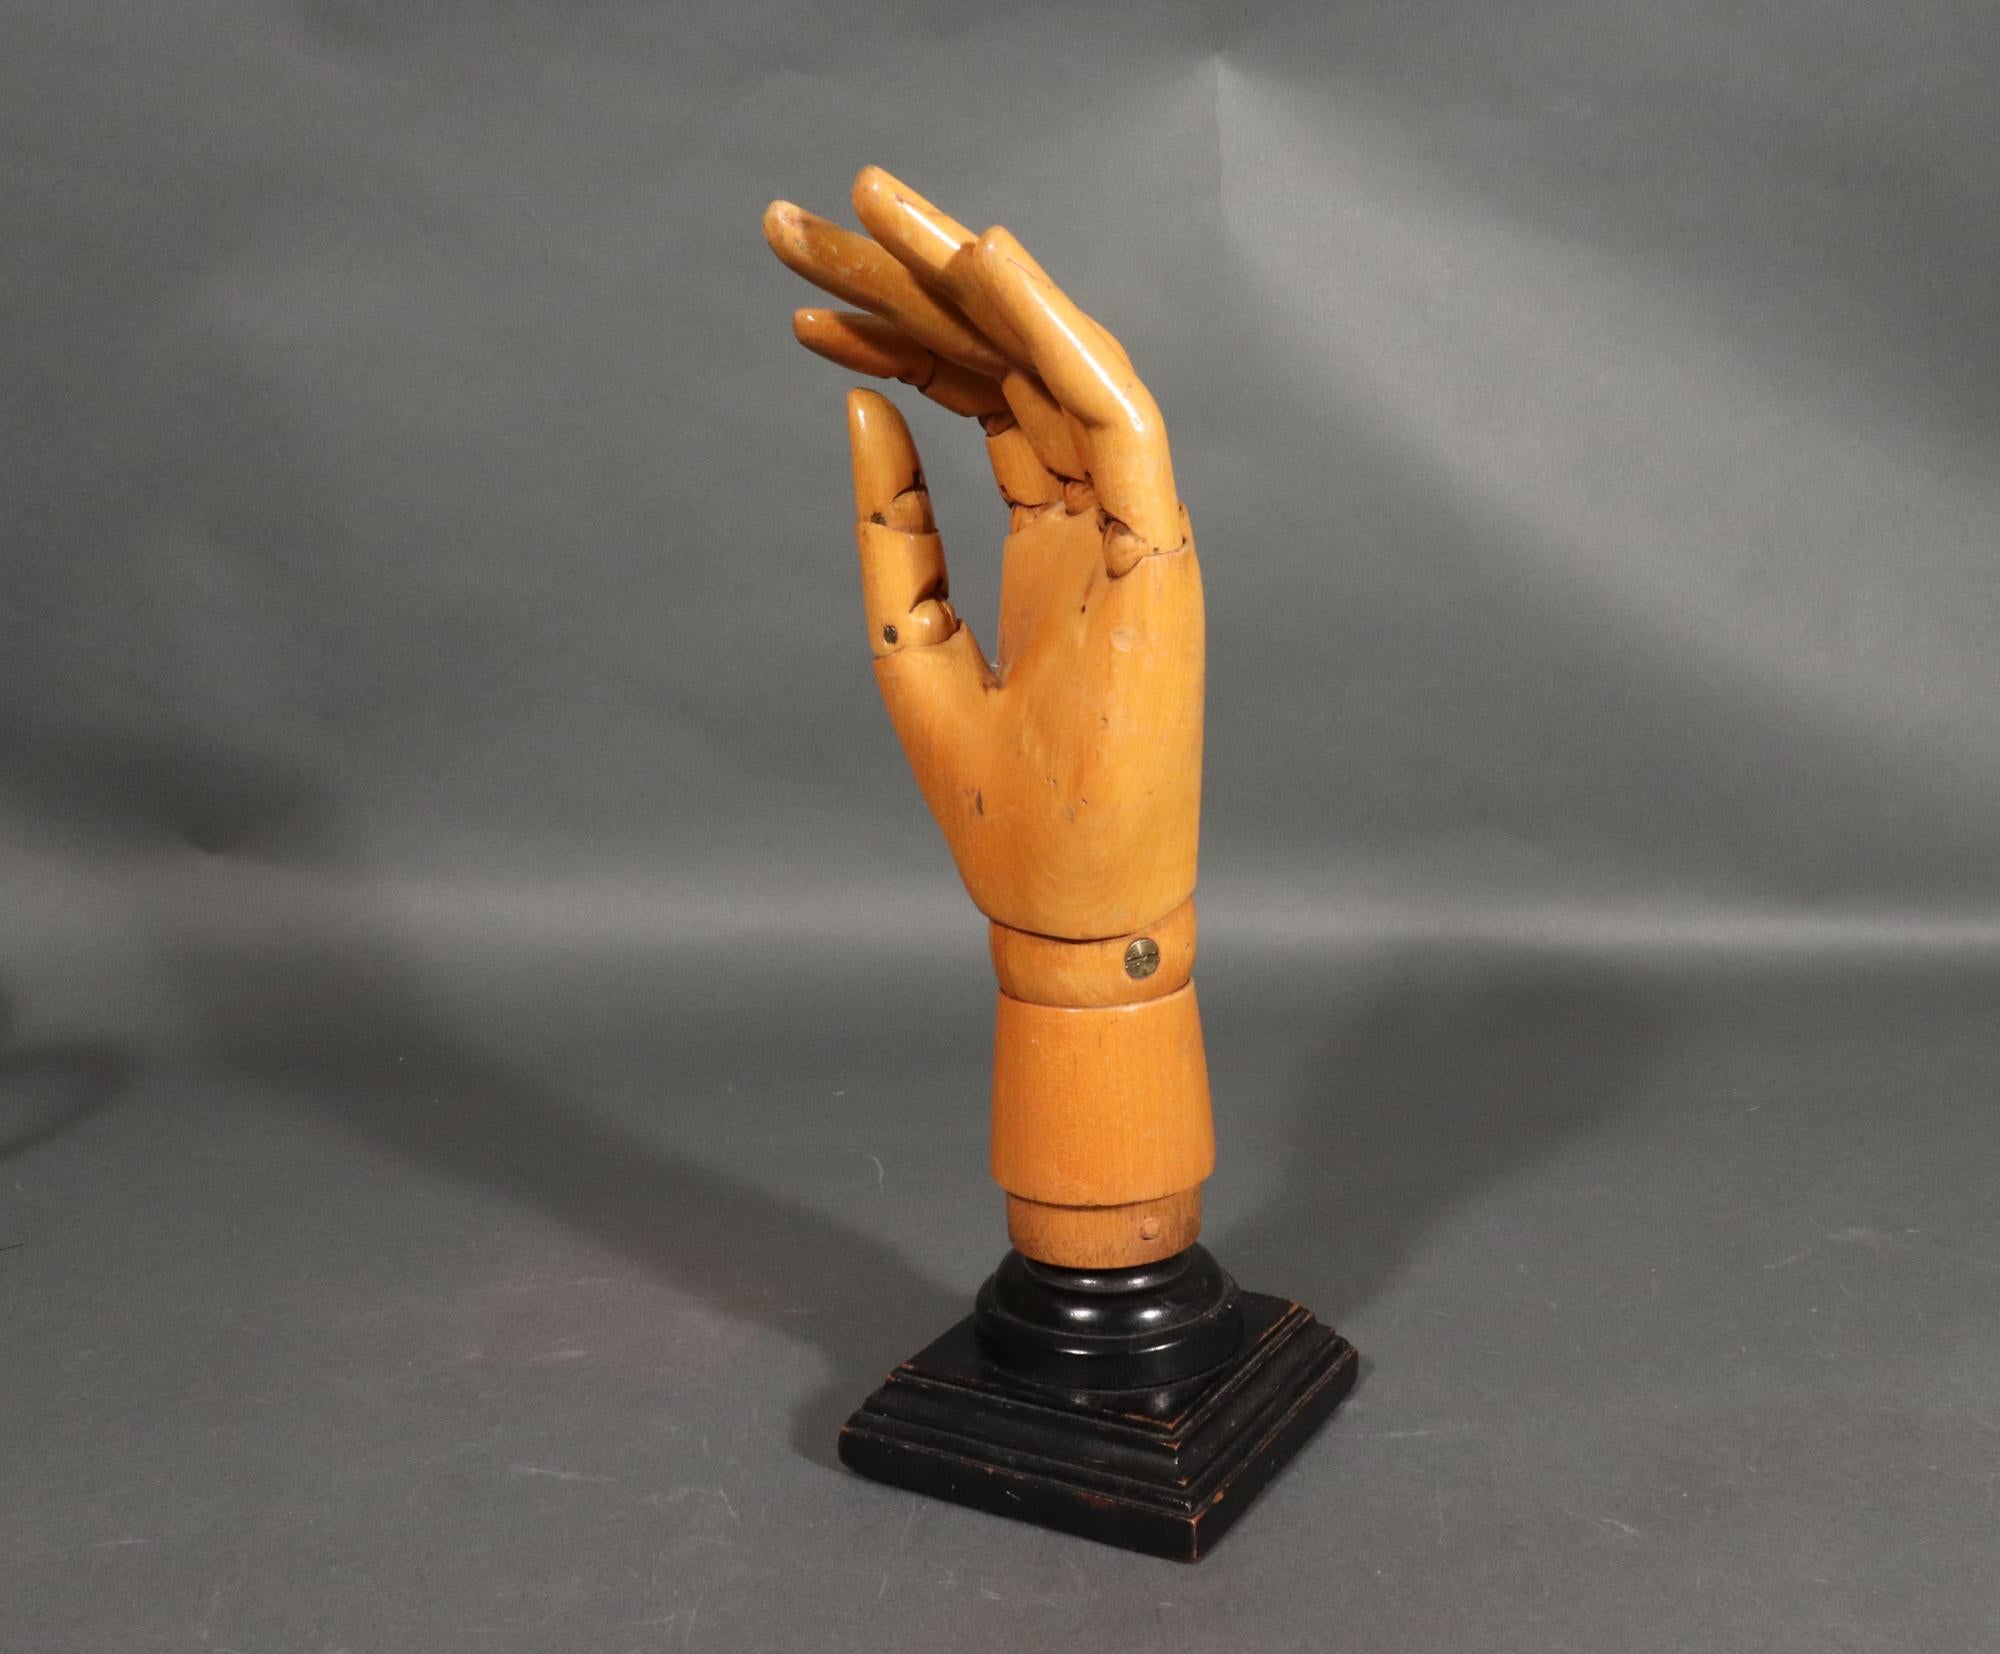 Articulated Wood Artist Hand Model,
1950s-1970

The beautifully carved light wood hand is articulated at the wrist and the base of each finger while the forefinger and thumb are also articulated at the knuckle and the other fingers each have a